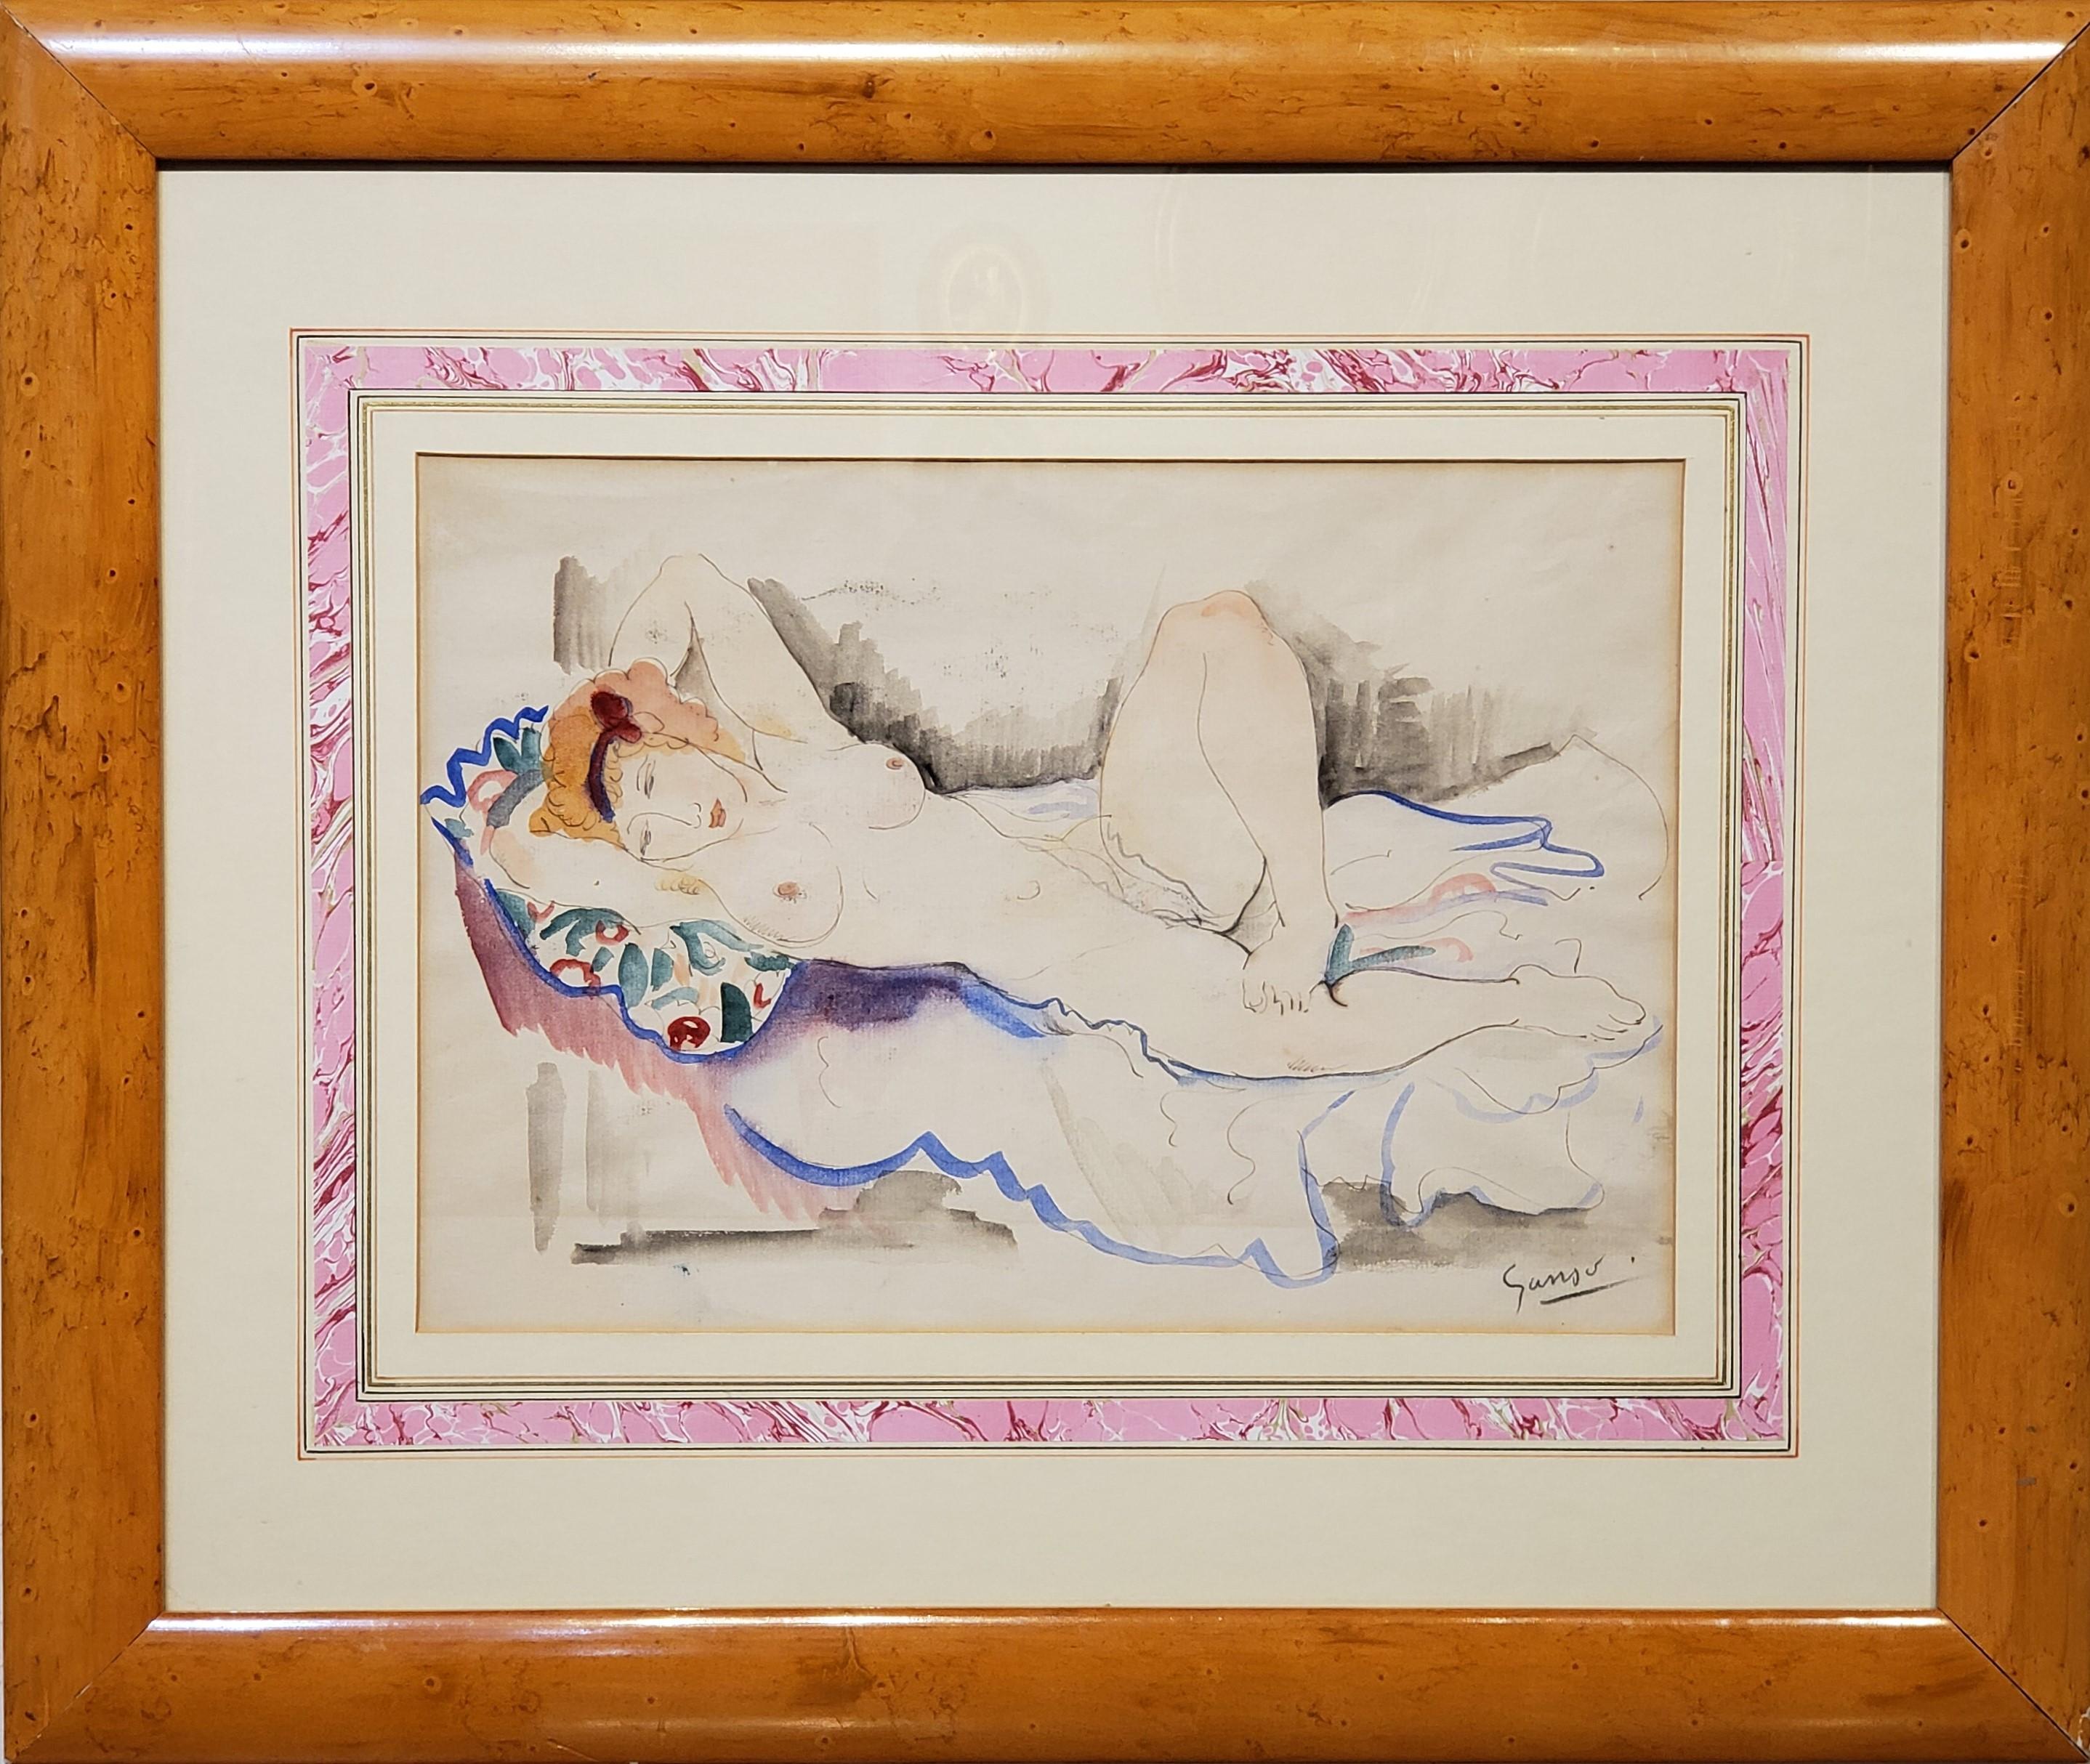 A Female Nude Watercolor.

This watercolor on paper measures 15.5" wide by 10.5" tall and is signed in the lower right corner by Emil Ganso an American artist who lived between 1895 and 1941.

With mat and in the frame this figurative water color